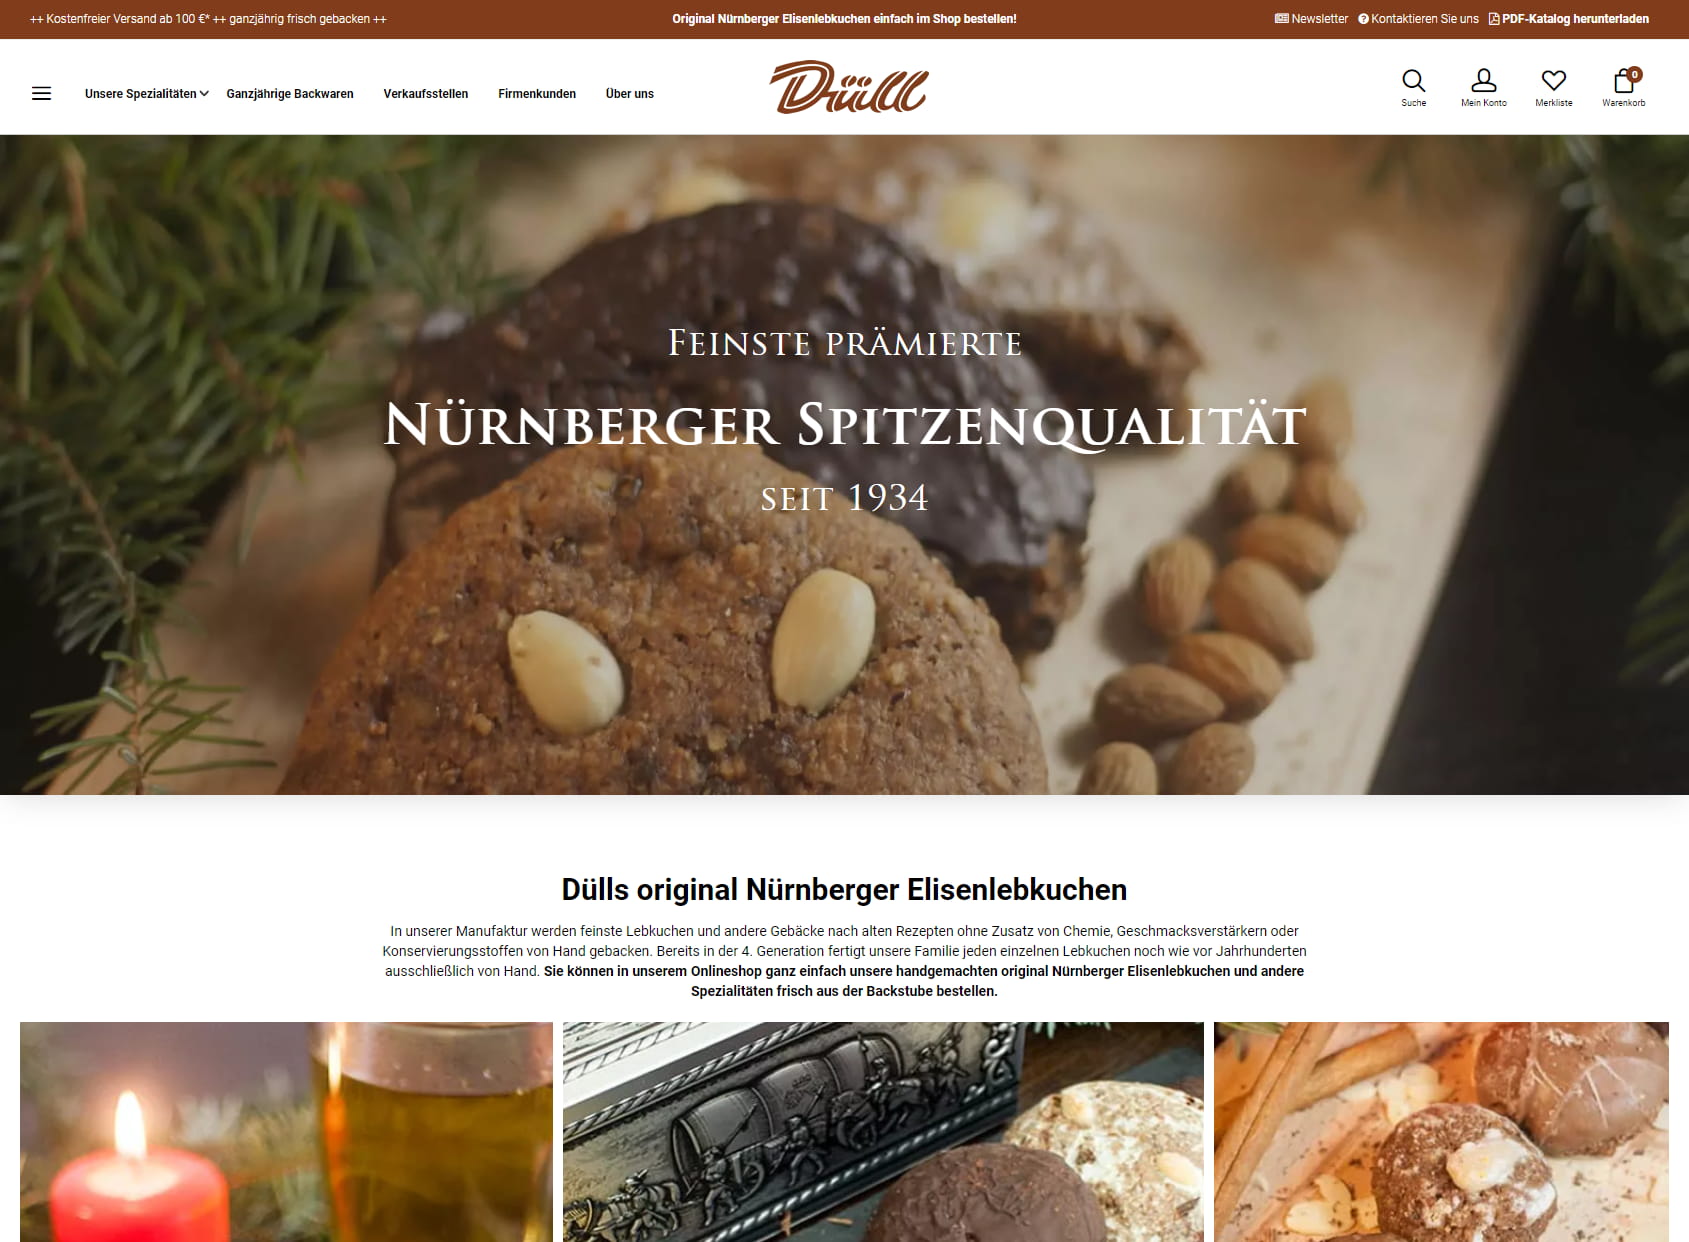 Bakery and Gingerbread manufacture Düll